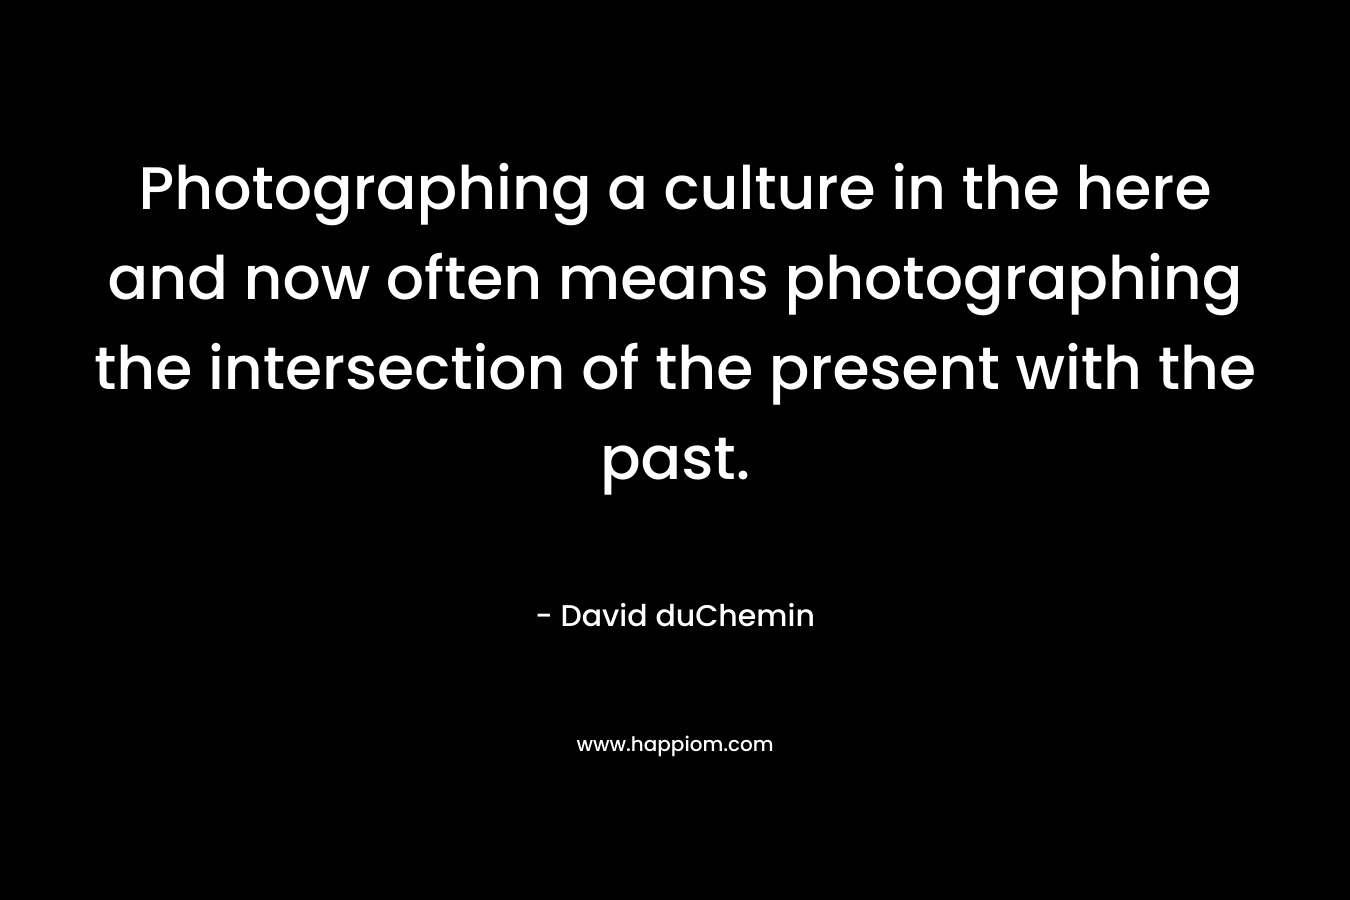 Photographing a culture in the here and now often means photographing the intersection of the present with the past. – David duChemin